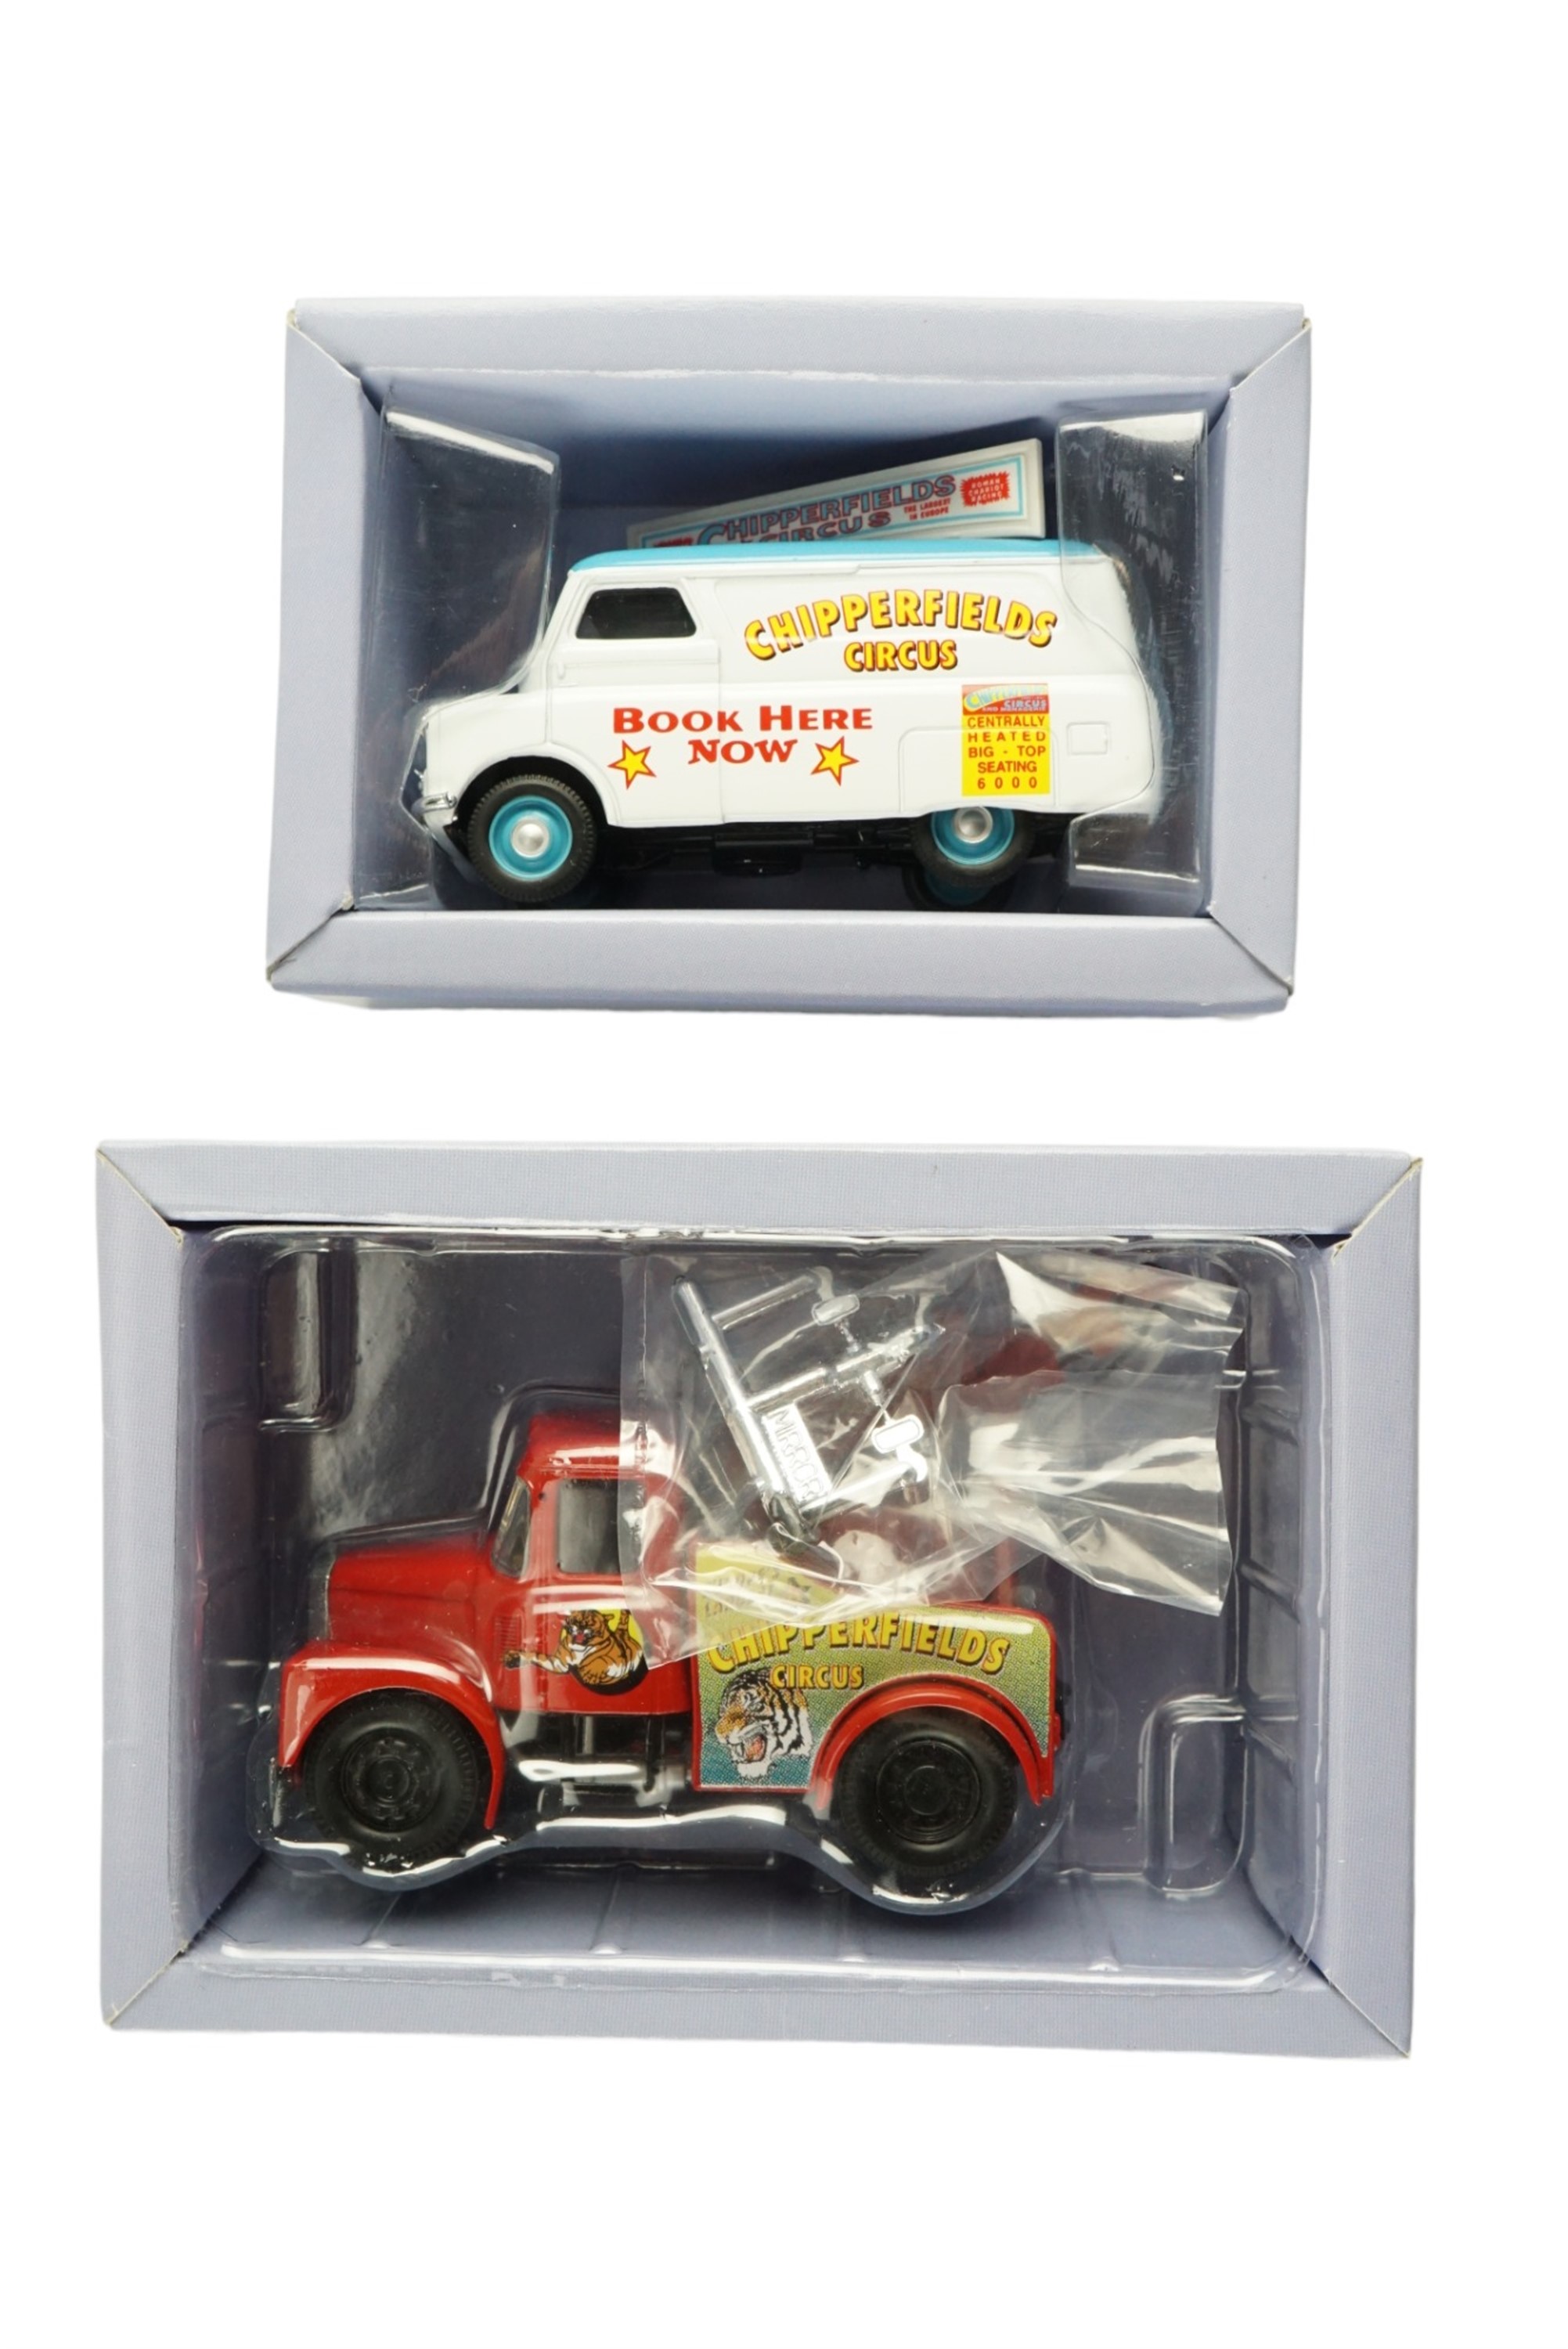 Three Corgi Chipperfields Circus die-cast vehicles, advance booking vehicle, Scammell highwayman - Image 3 of 3